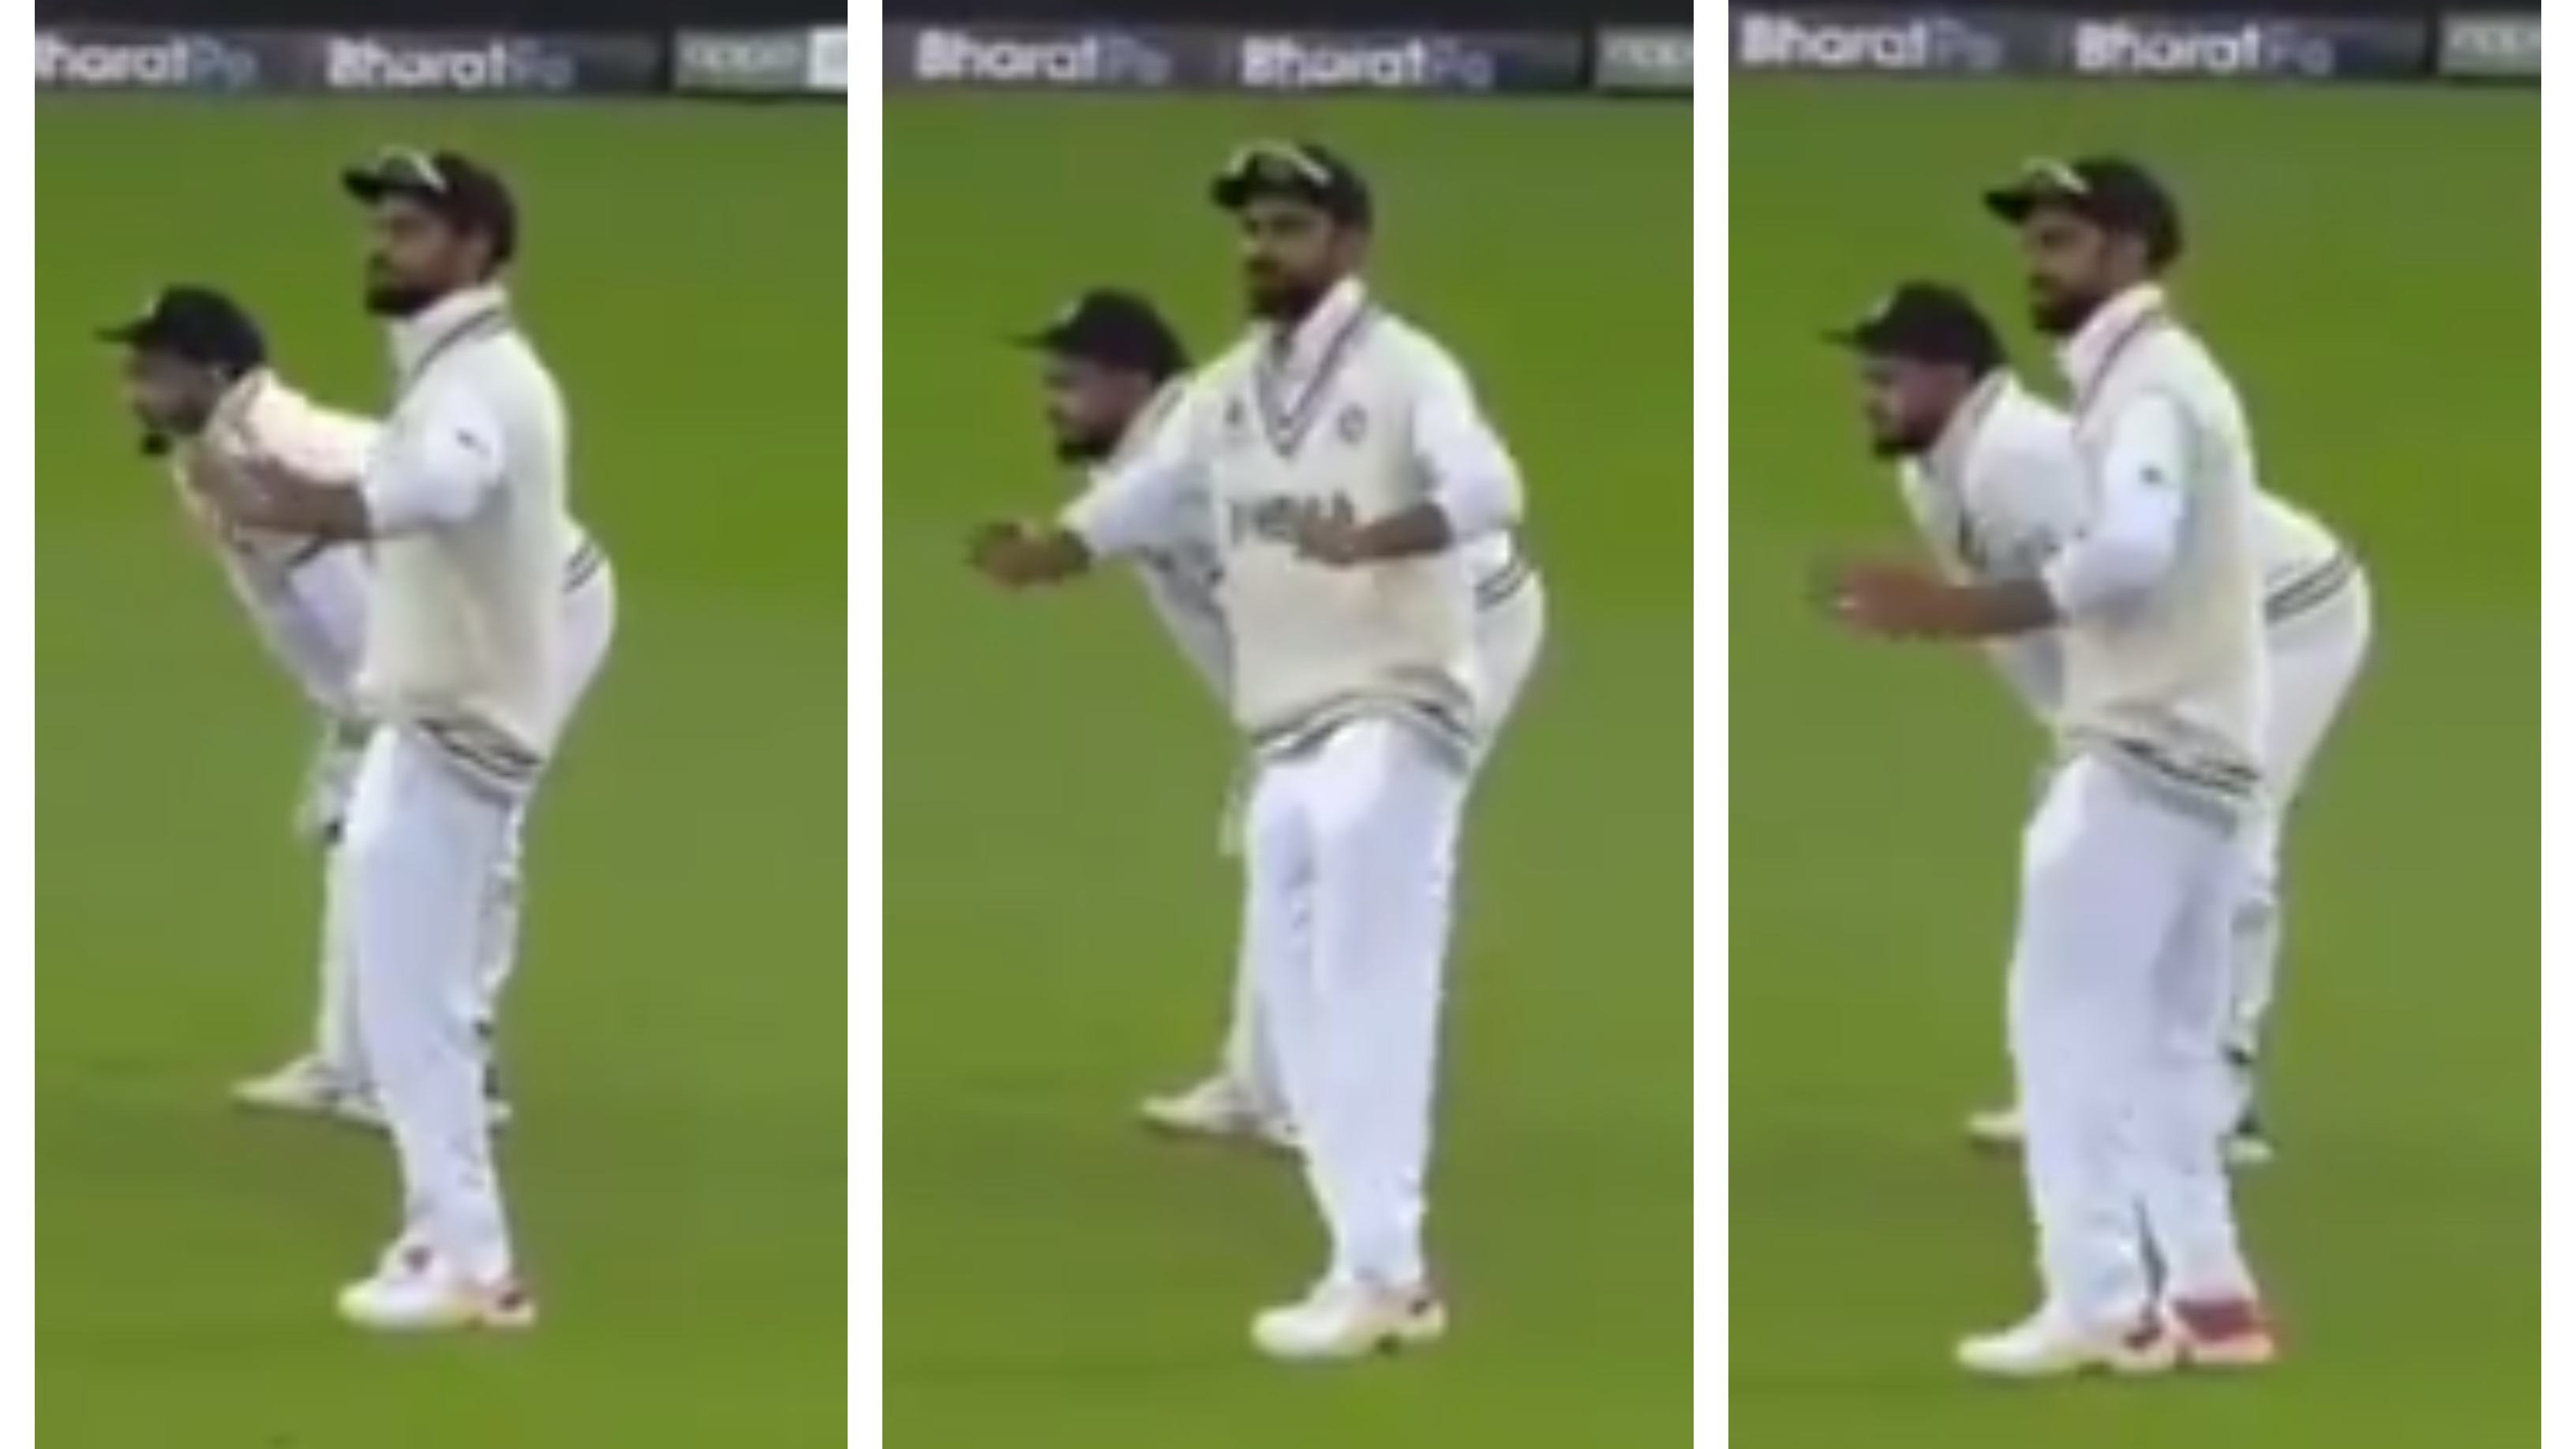 WTC 2021 Final: WATCH – Virat Kohli displays his dance moves while fielding in the slip region